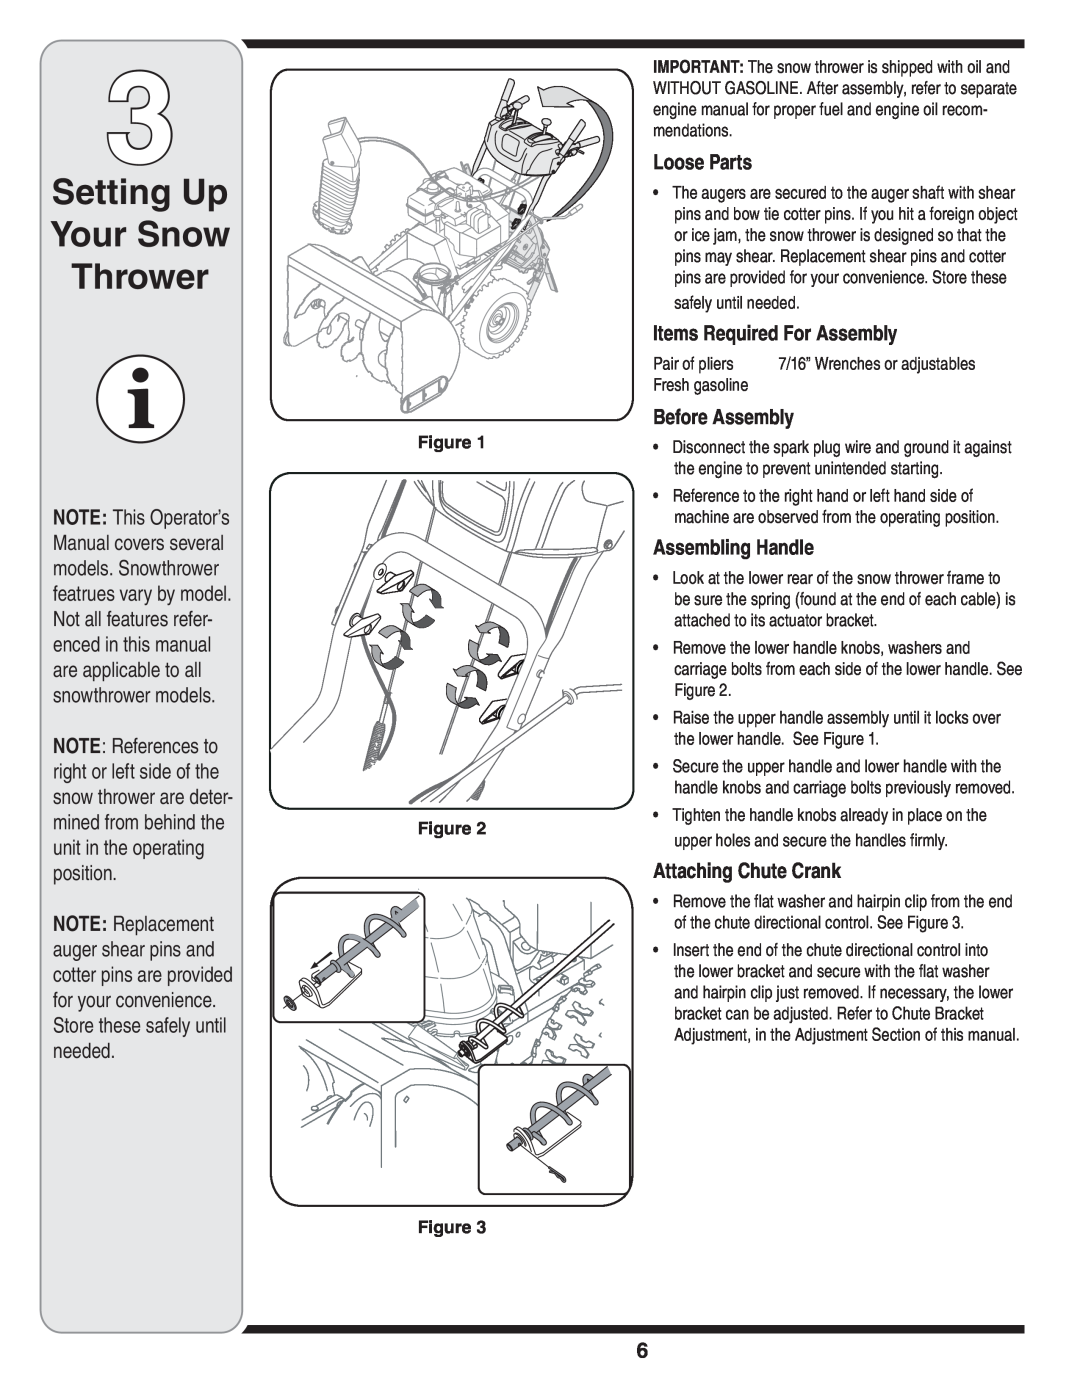 MTD 769-03247 Setting Up Your Snow Thrower, Loose Parts, Items Required For Assembly, Before Assembly, Assembling Handle 